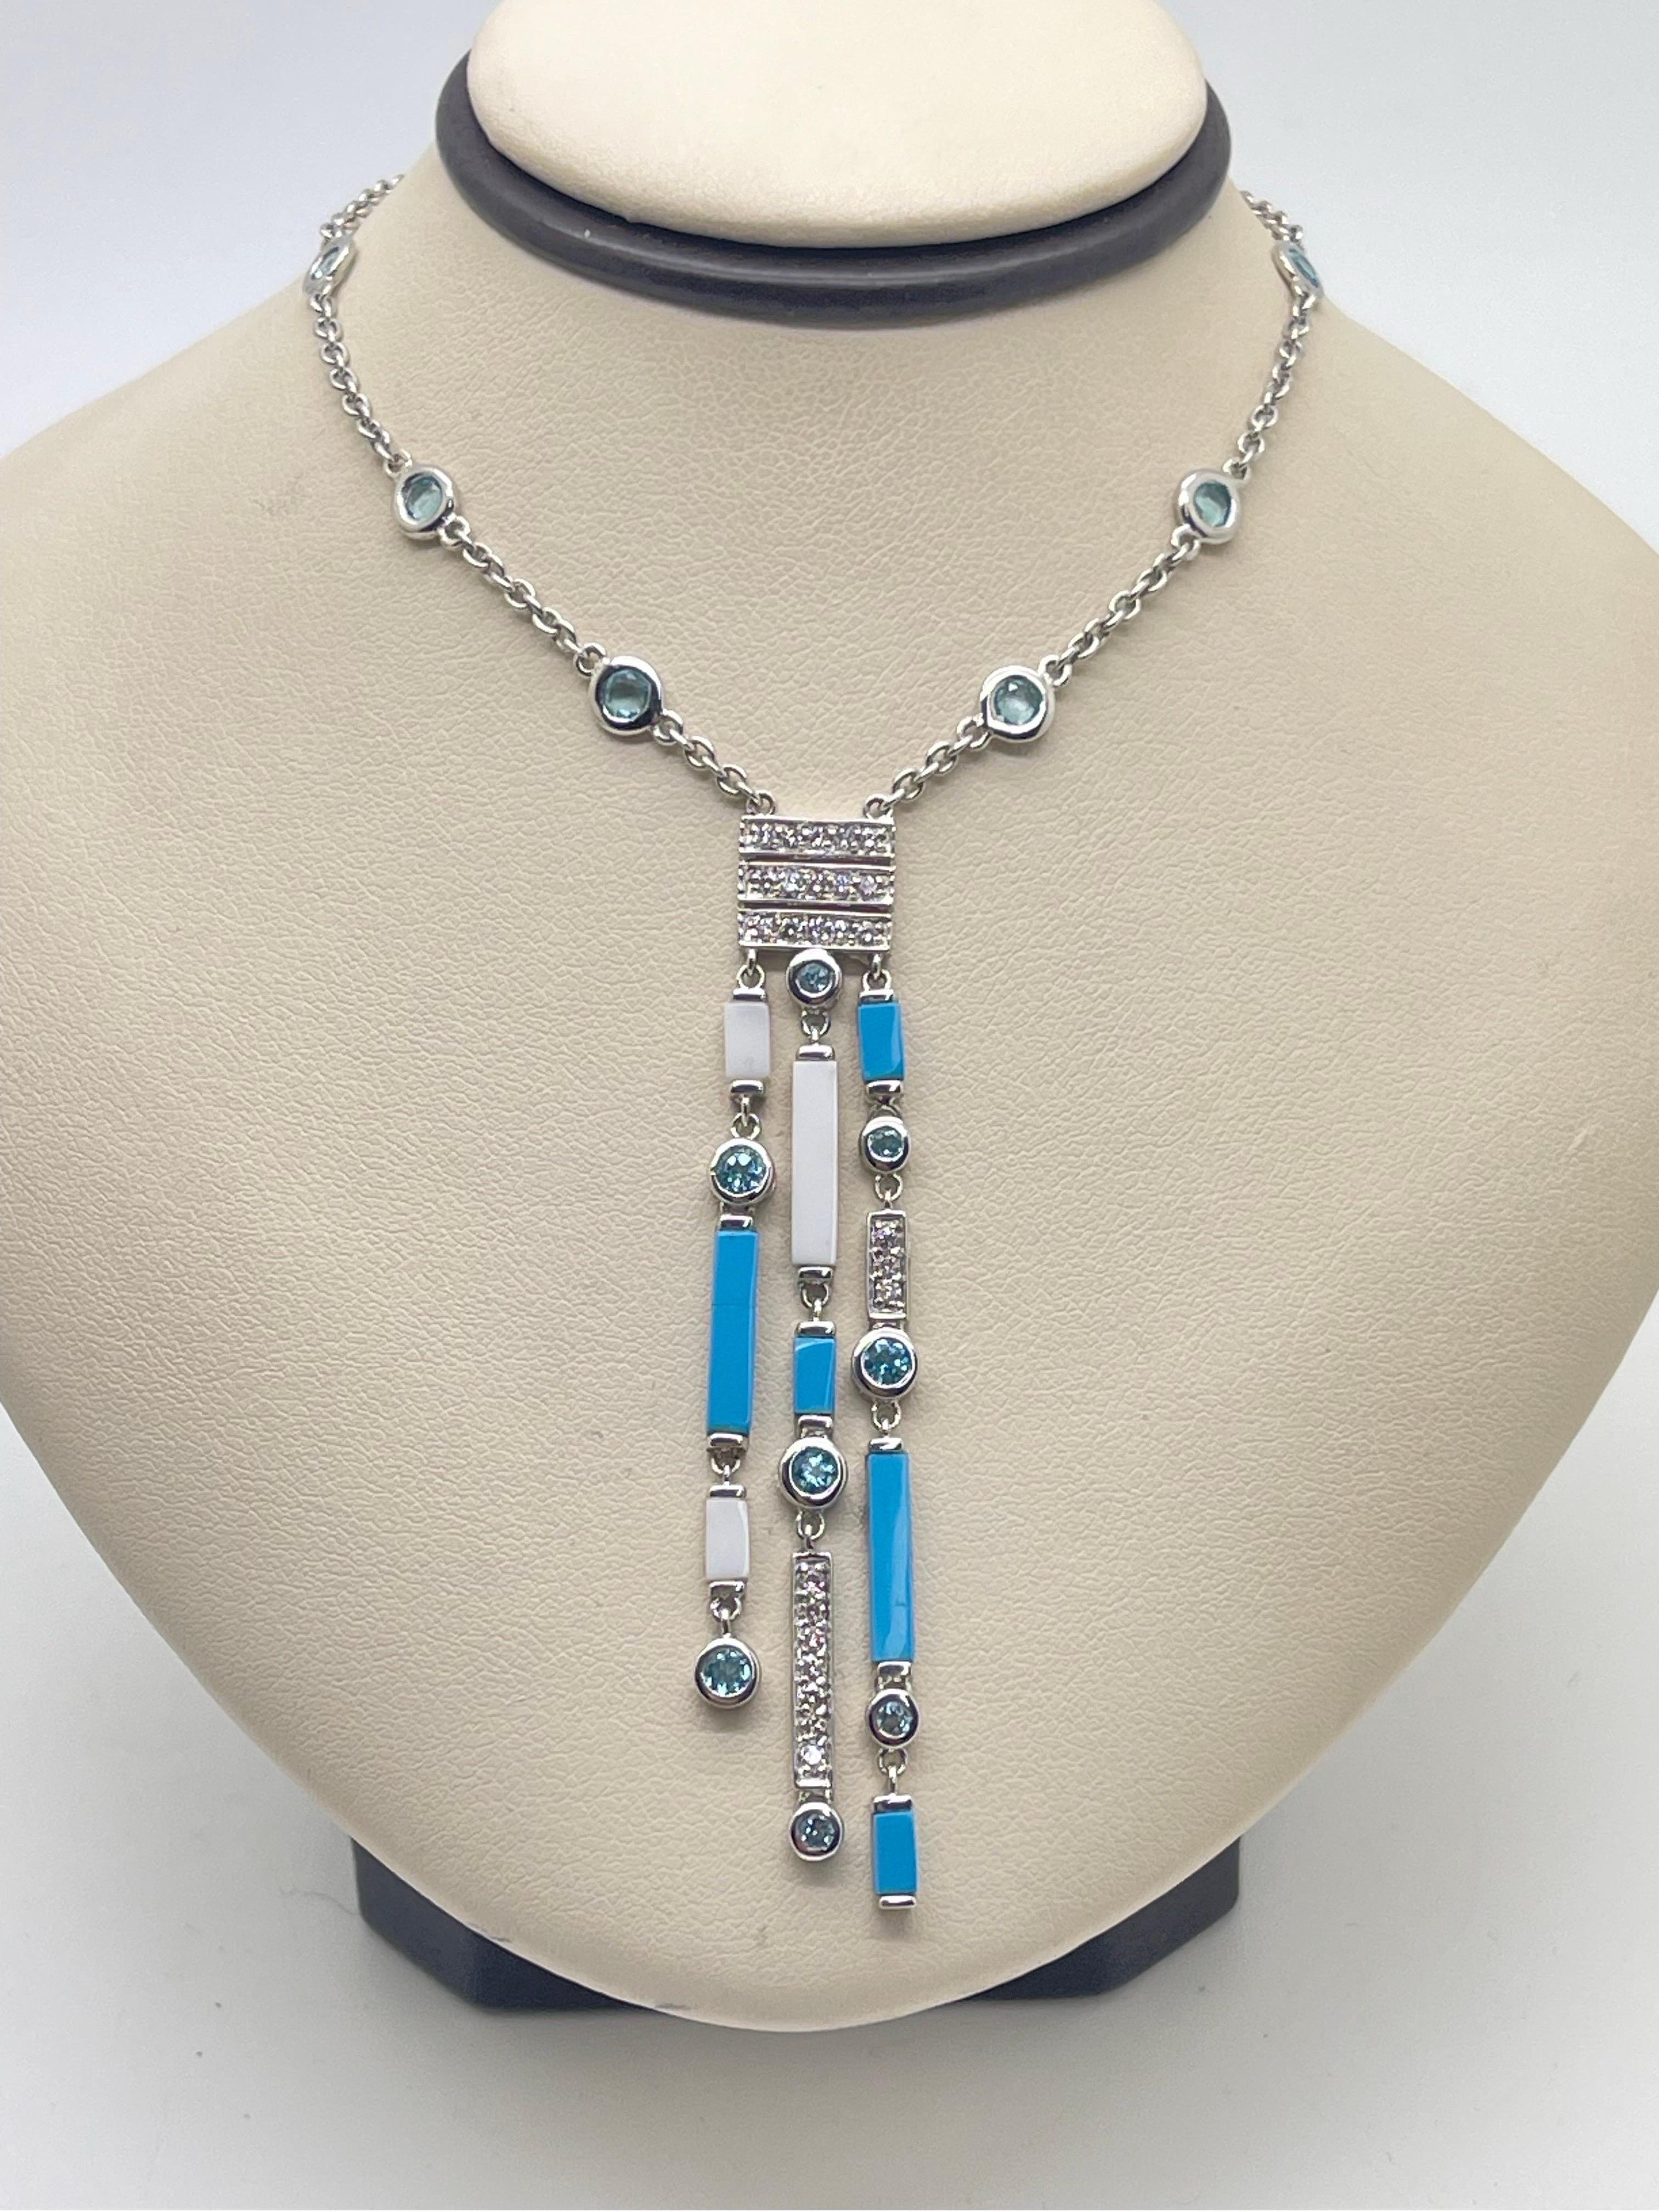 Stunning Turquoise, White Agate & Diamond Necklace with Blue Topaz accents In 18k White Gold.

* 0.32 cts in diamonds,

* 2.65 cts in turquoise/ white agate.

* 1.43 cts in blue topaz.

The length is adjustable 15” or 16”.